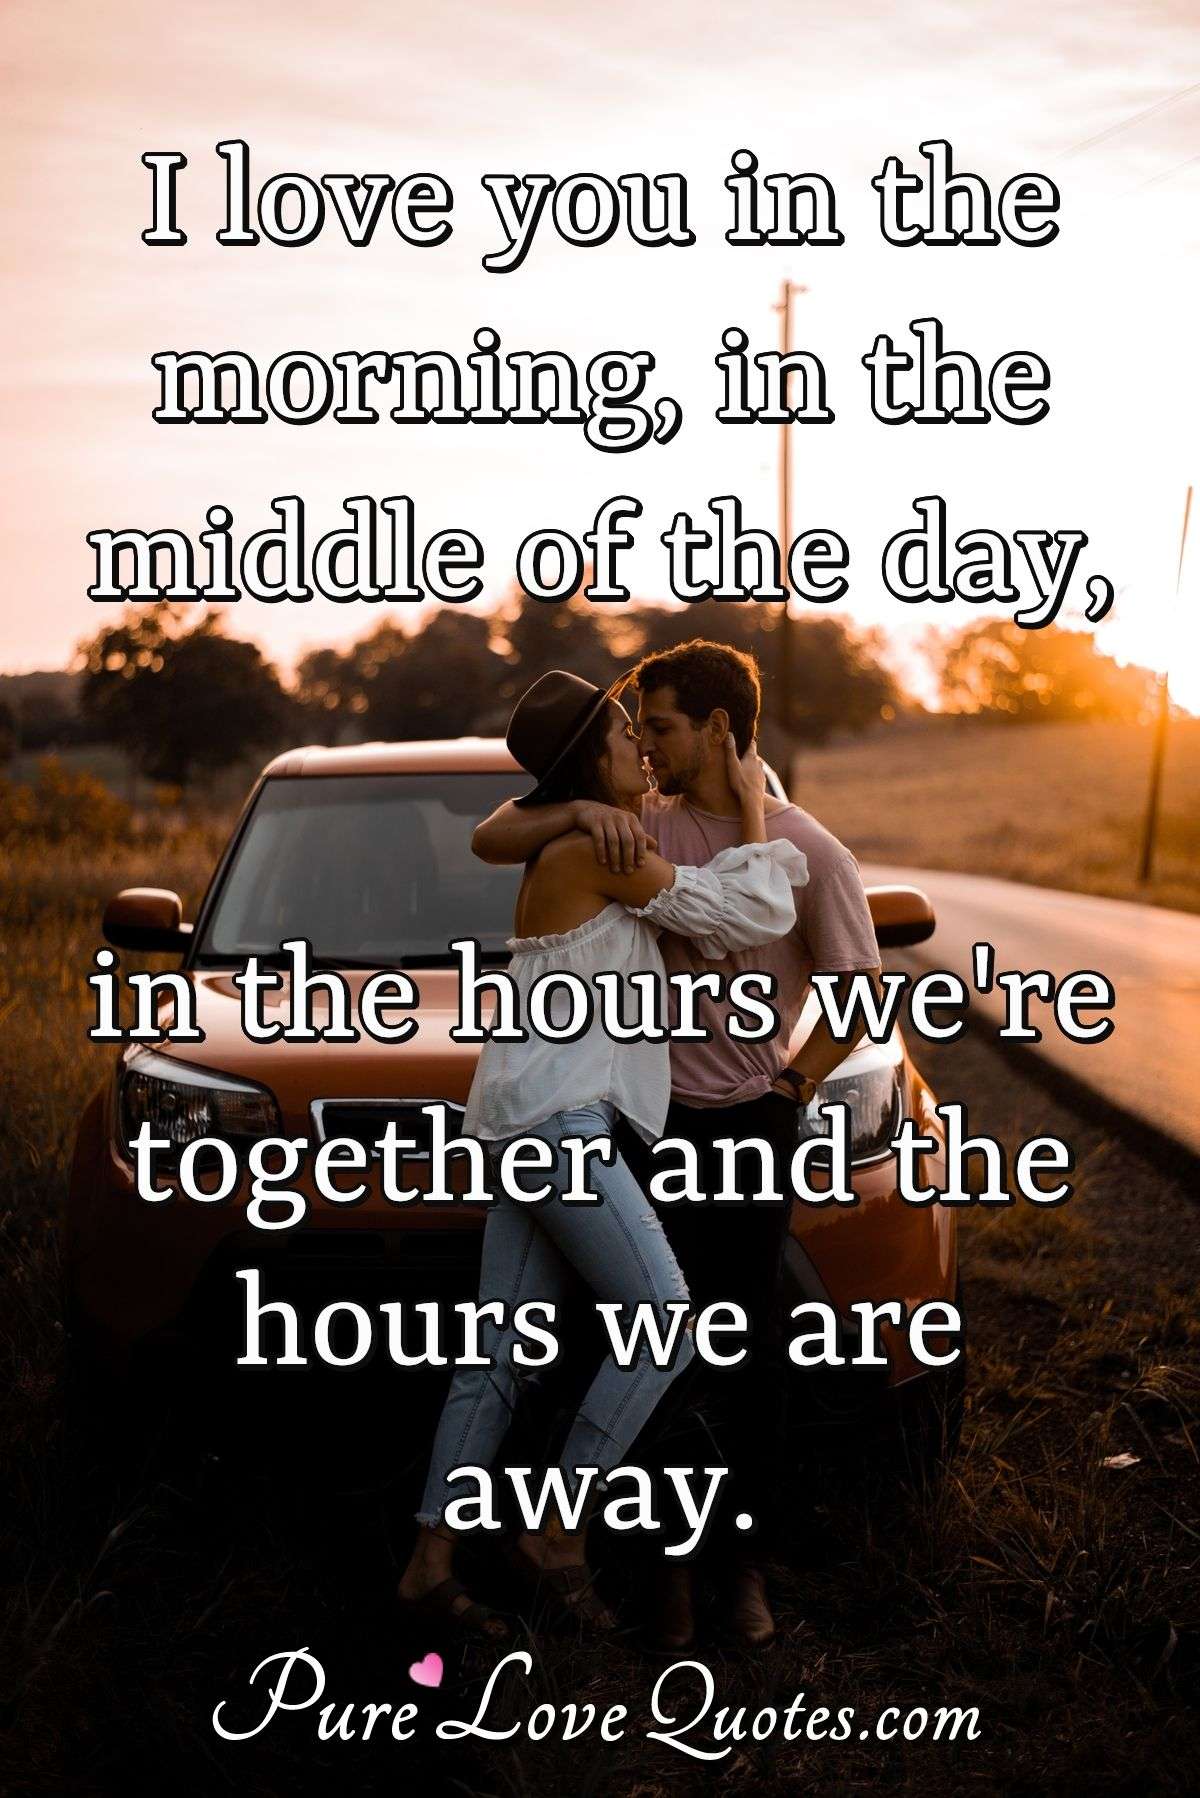 I love you in the morning, in the middle of the day, in the hours we're together and the hours we are away. - Anonymous